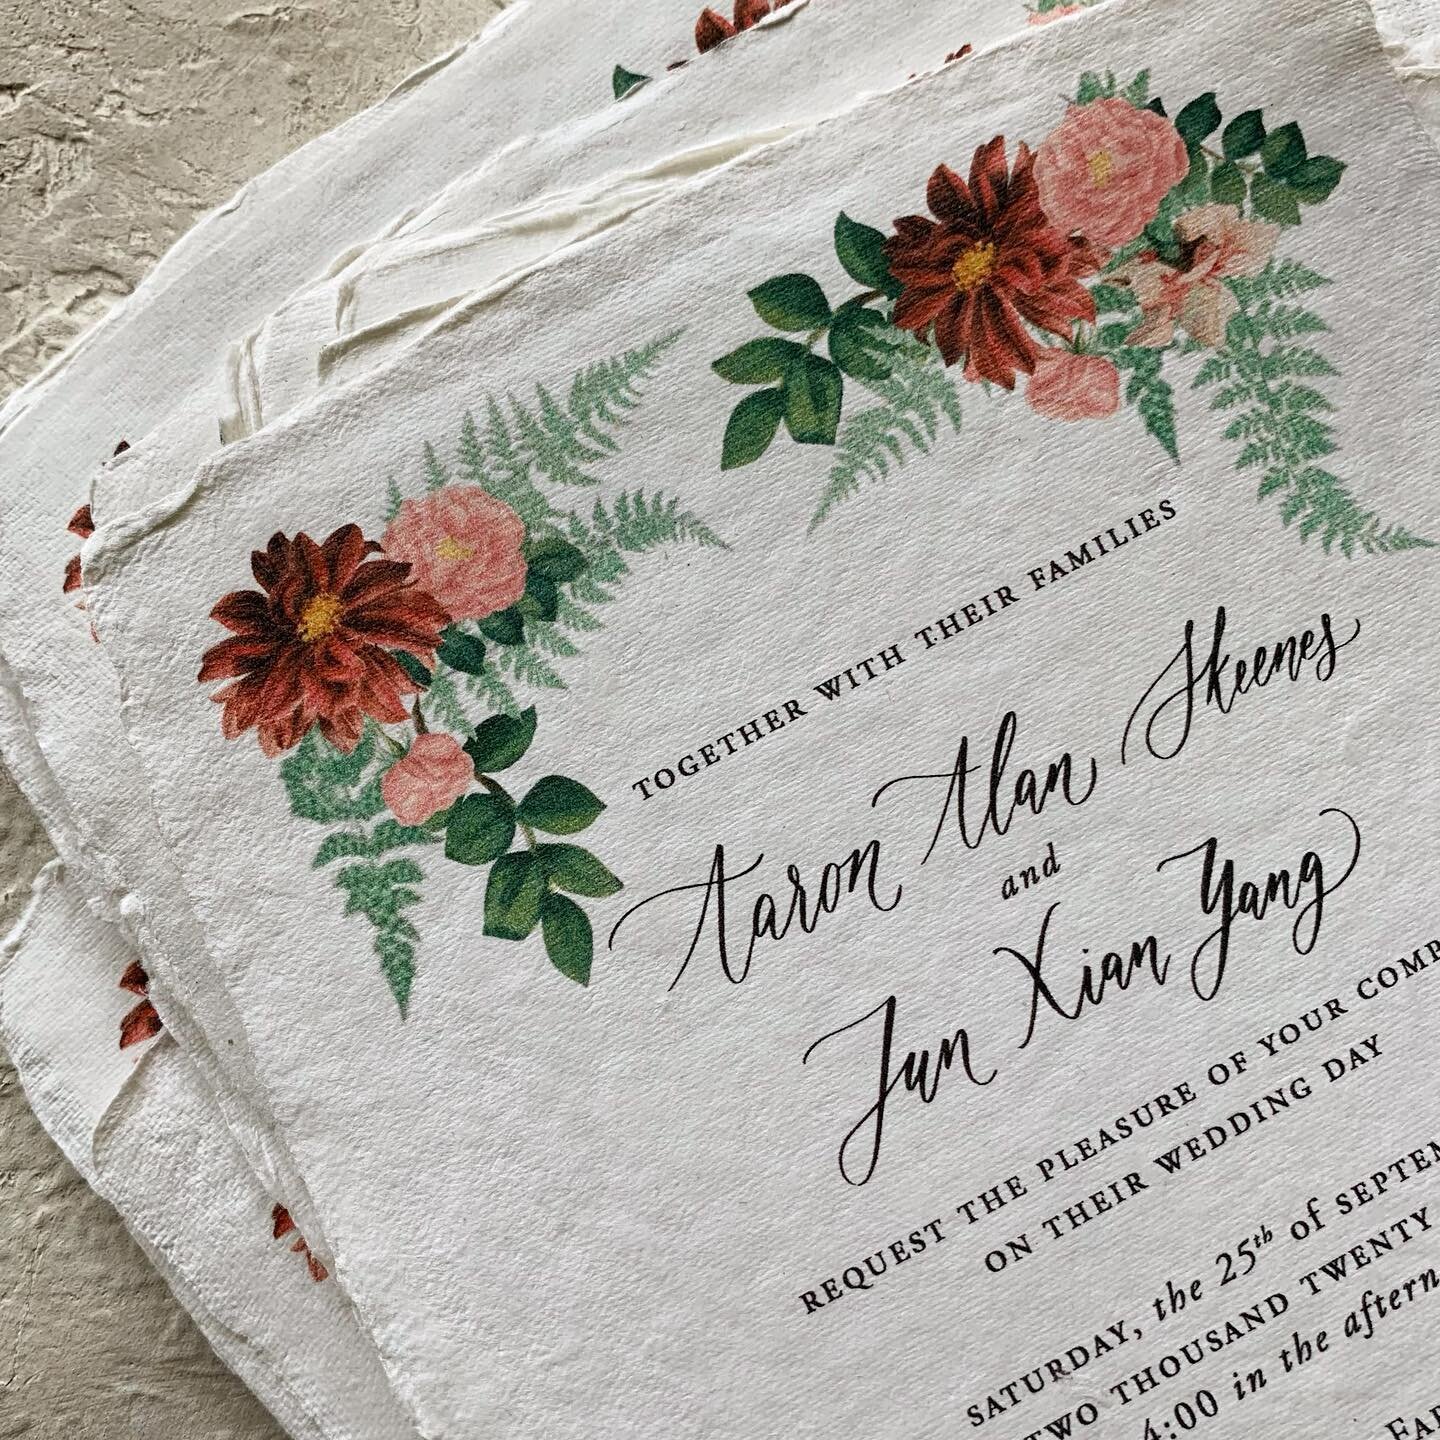 vintage florals on handmade paper 🌹 for a farm wedding in New Jersey #weddingpaper #weddinginvitations #weddinginvitationsuite #handmadepaper #handmadepapergoods #decklededge #decklededgepaper #weddingcalligraphy #weddingcalligrapher #farmwedding